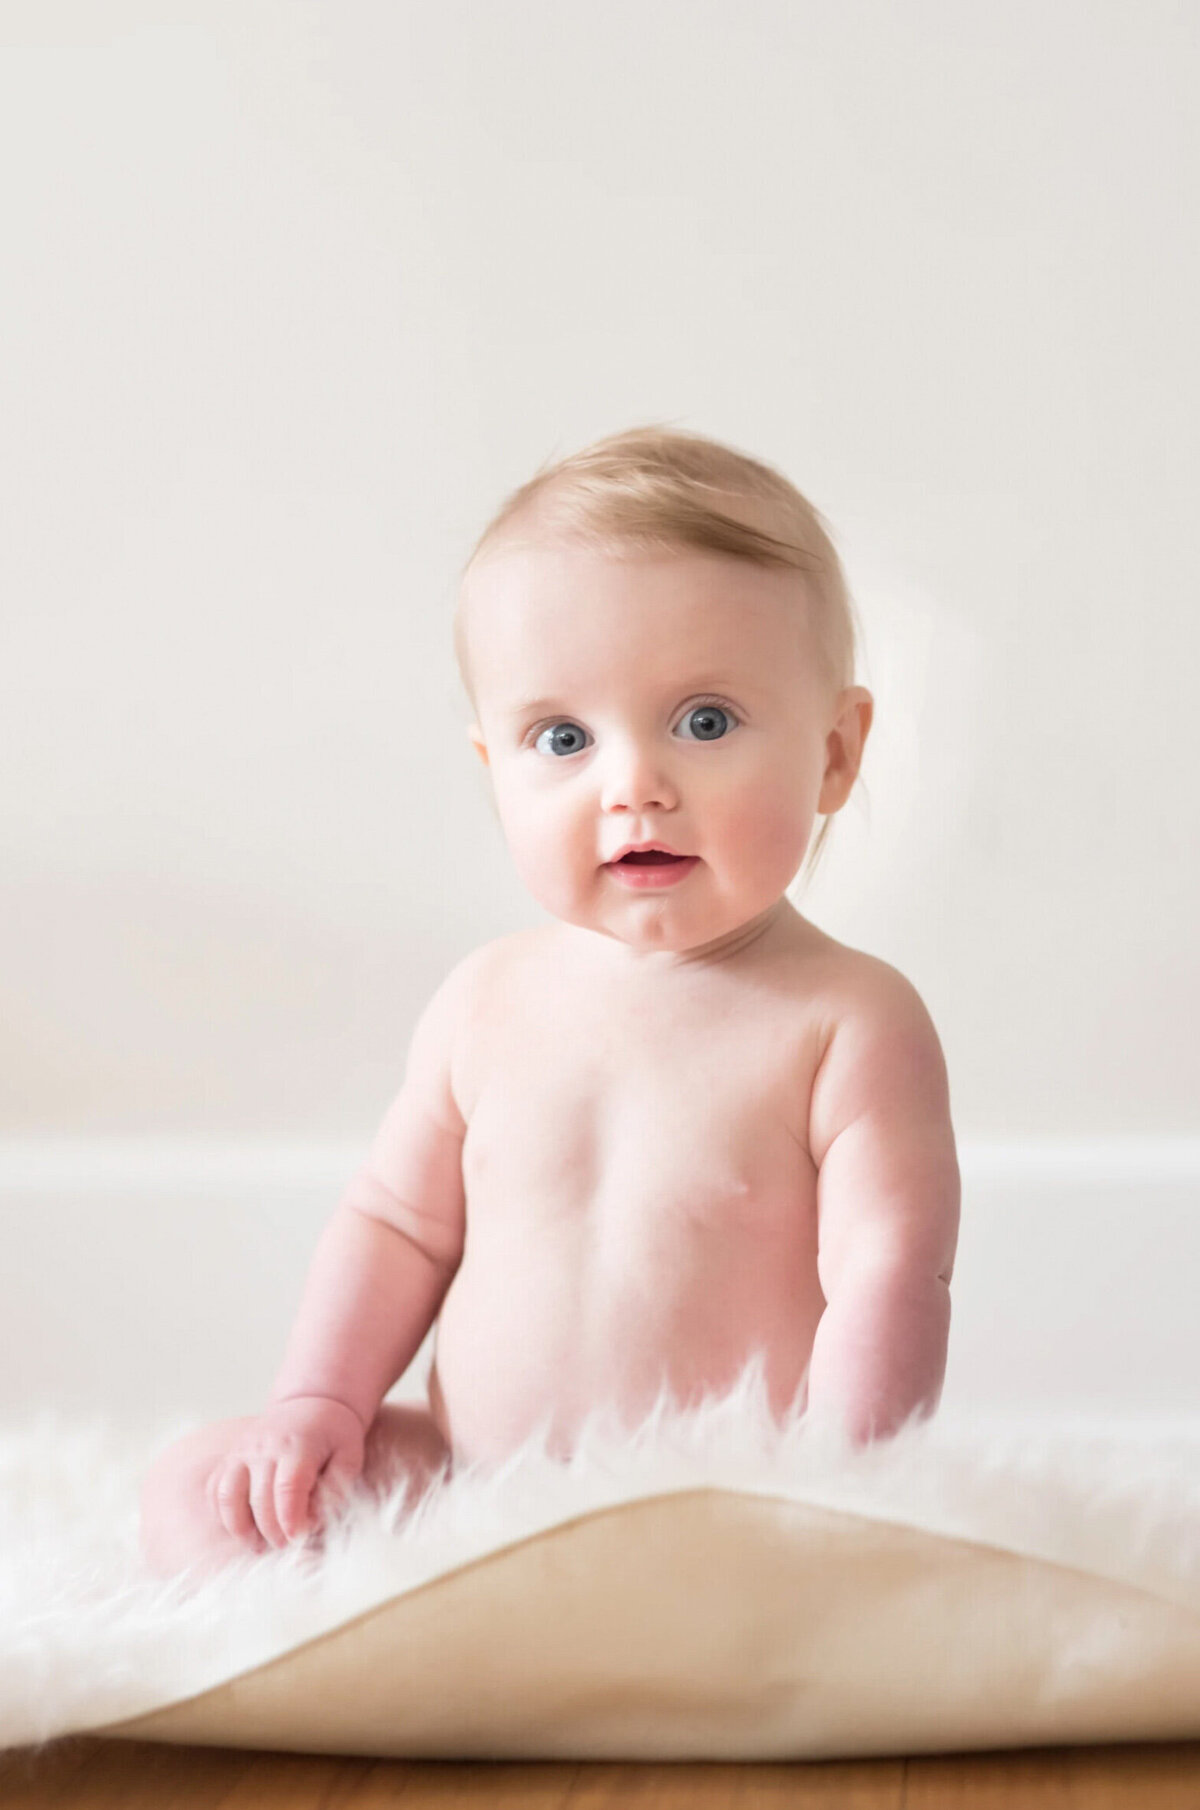 Toddler boy, shirtless, sitting on a fuzzy white blanket in front of a cream colored wall